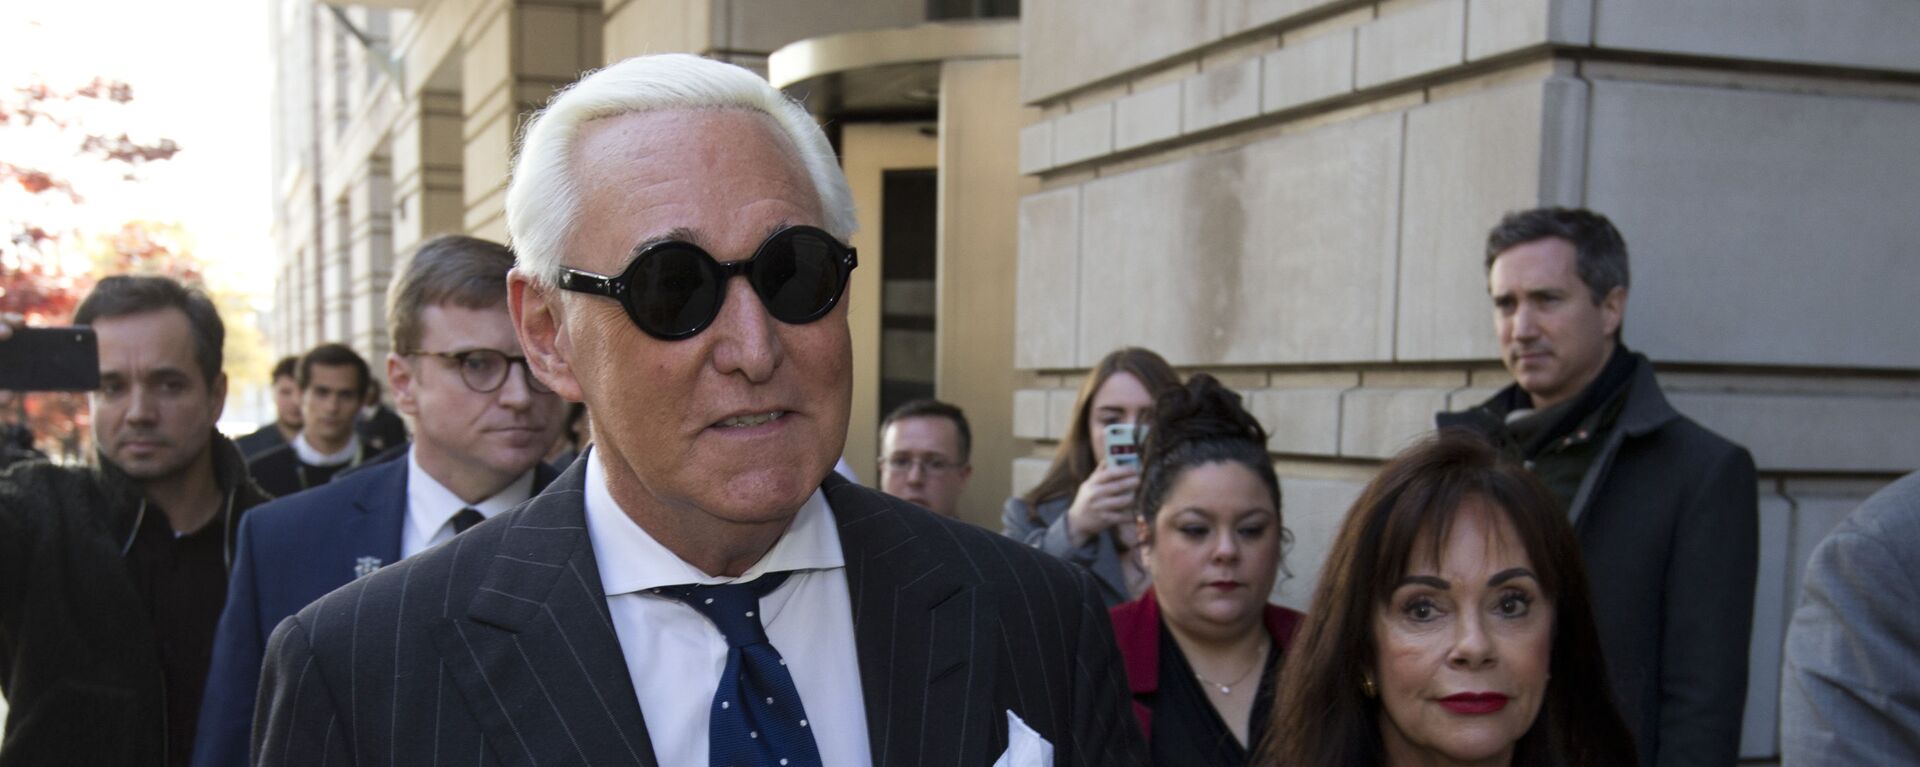 In this Nov. 15, 2019, file photo, Roger Stone, left, with his wife Nydia Stone, leaves federal court in Washington, Friday, Nov. 15, 2019 - Sputnik International, 1920, 03.11.2021